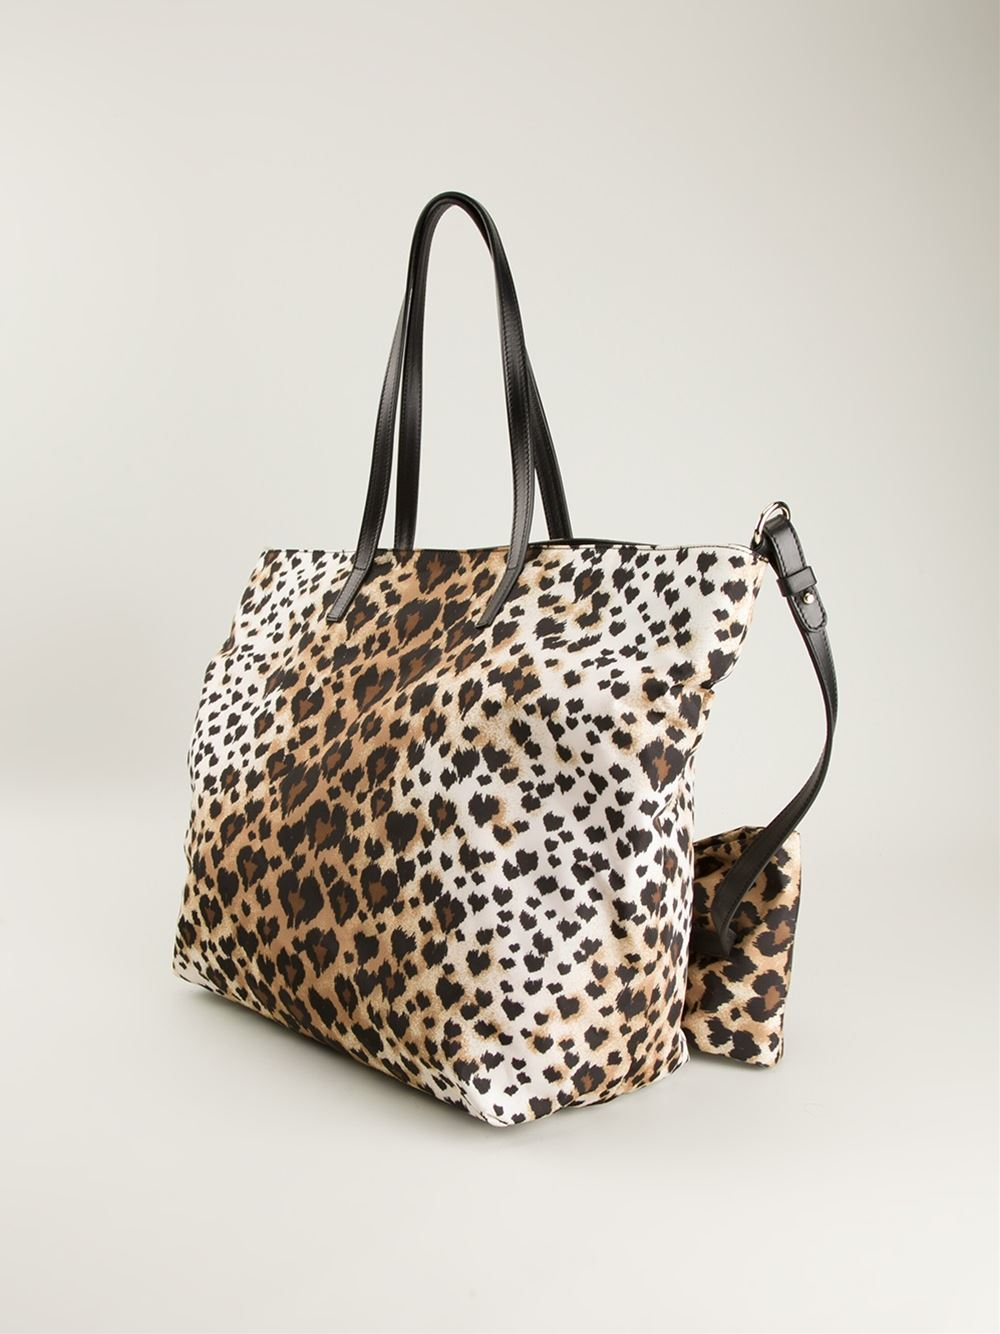 Lyst - Red Valentino Leopard Print Tote Bag in Natural